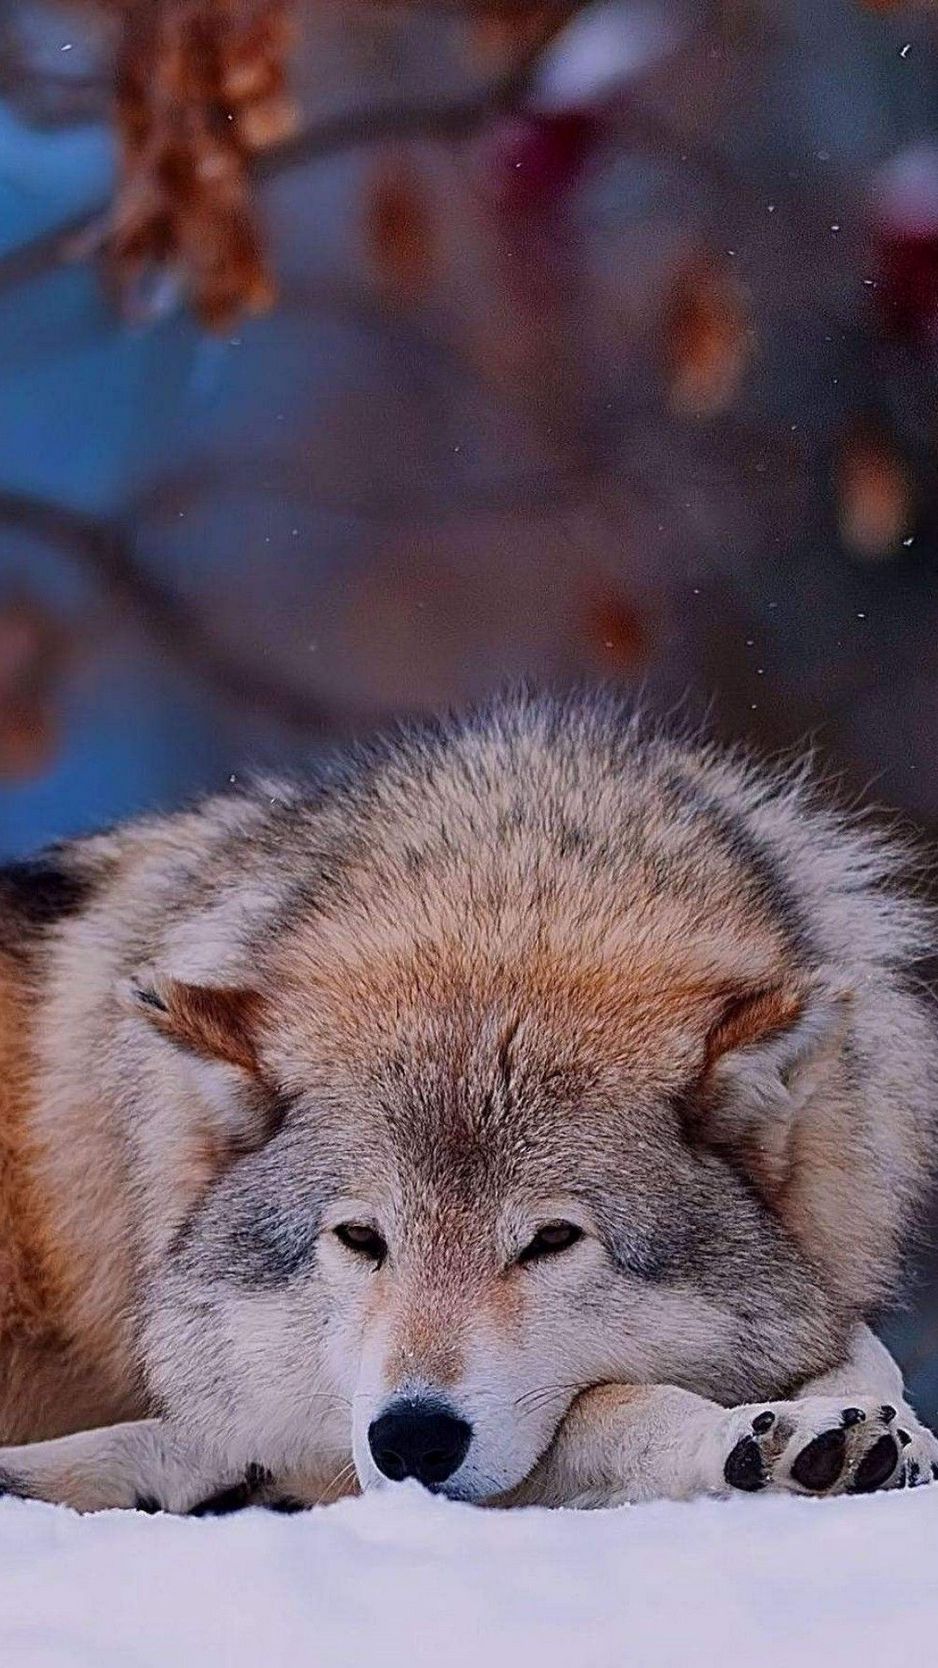 Download wallpaper 938x1668 wolf, down, sad, dog iphone 8/7/6s/6 for  parallax hd background